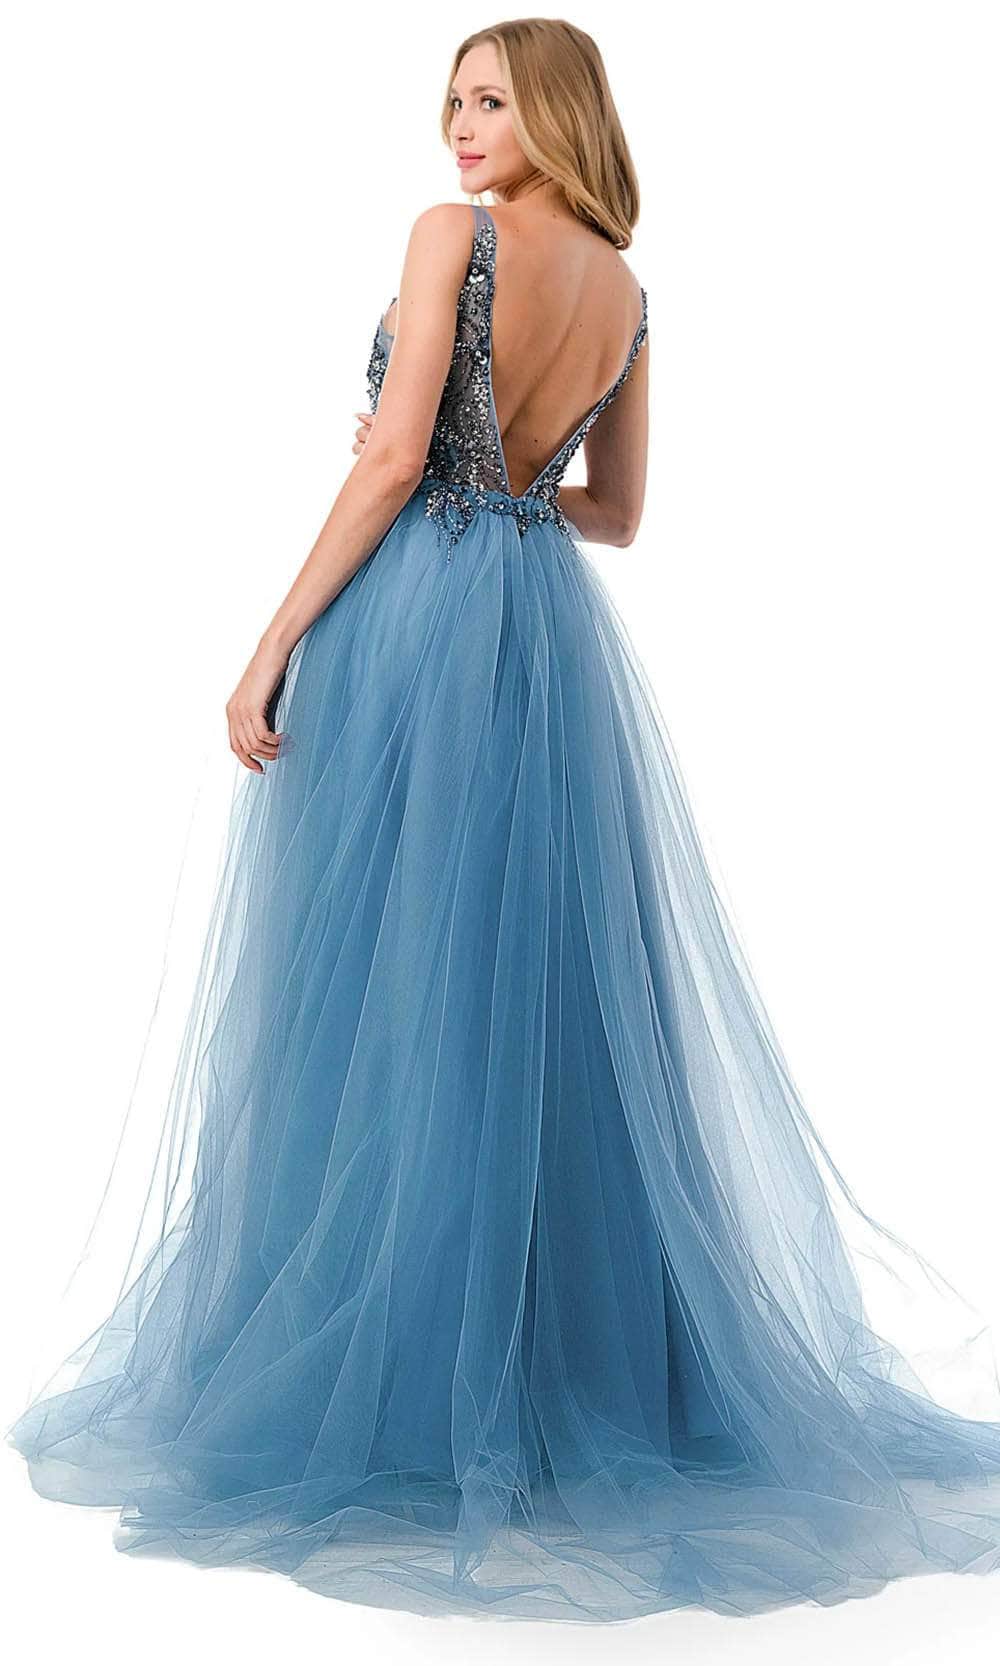 Beaded Illusion Bodice Tulle Gown